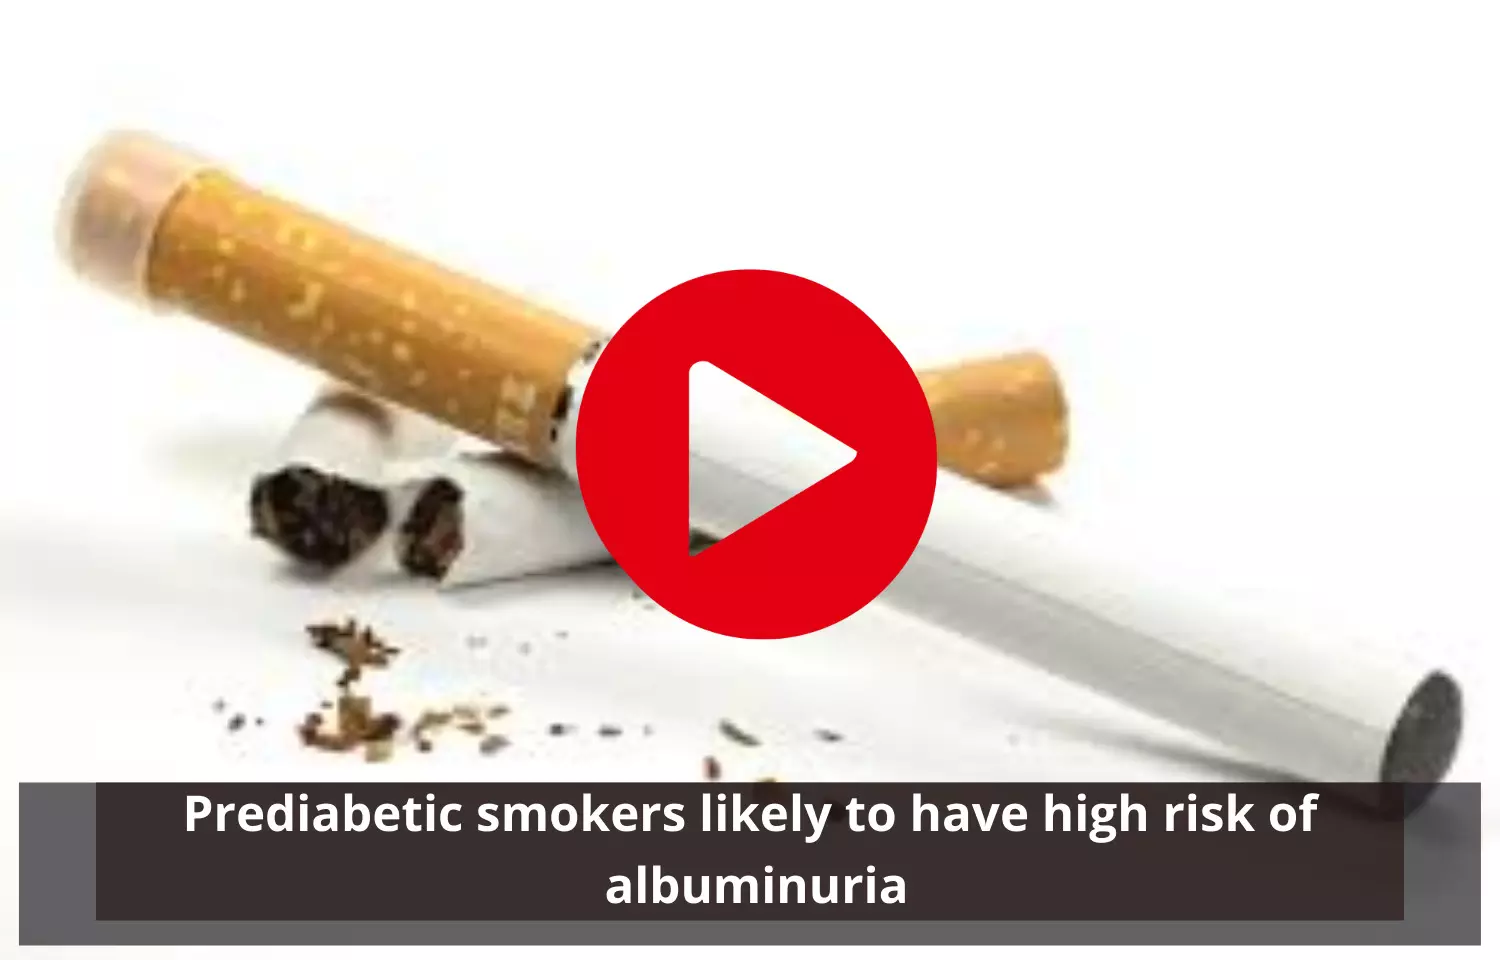 Prediabetic Smokers at High Risk of Albuminuria